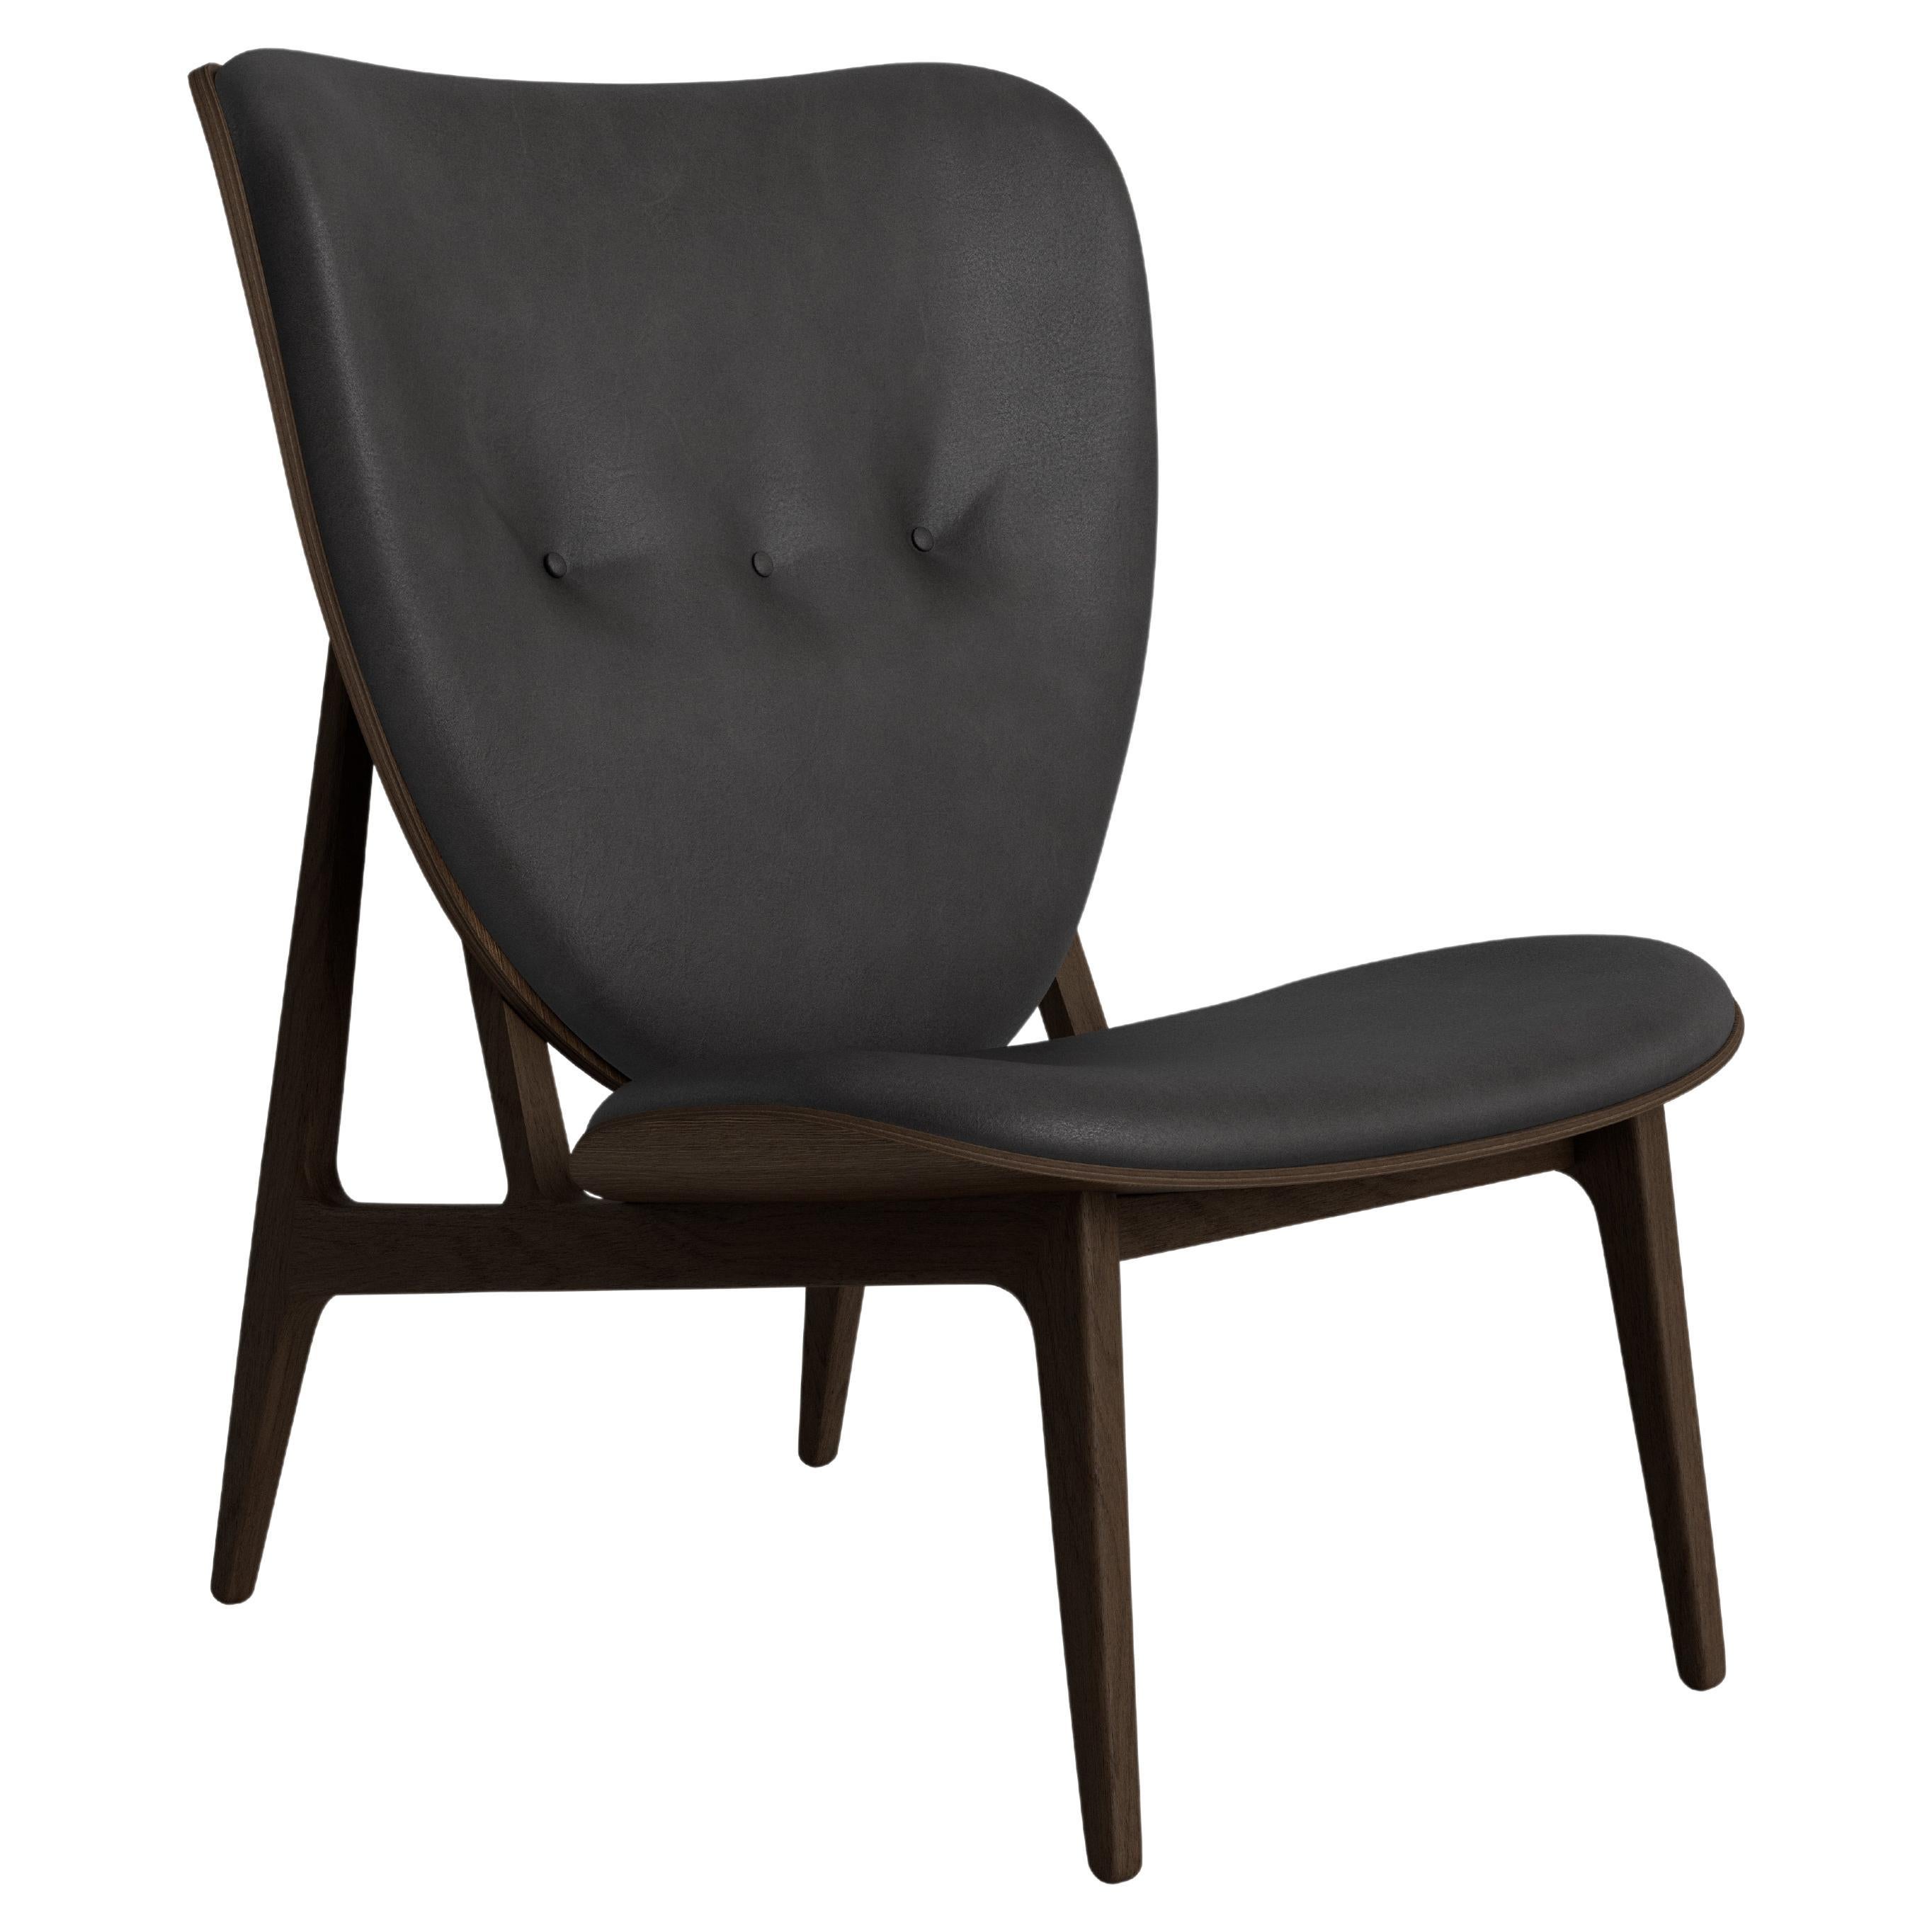 'Elephant' Wood Lounge Chair by Norr11, Dark Smoked Oak, Anthracite For Sale